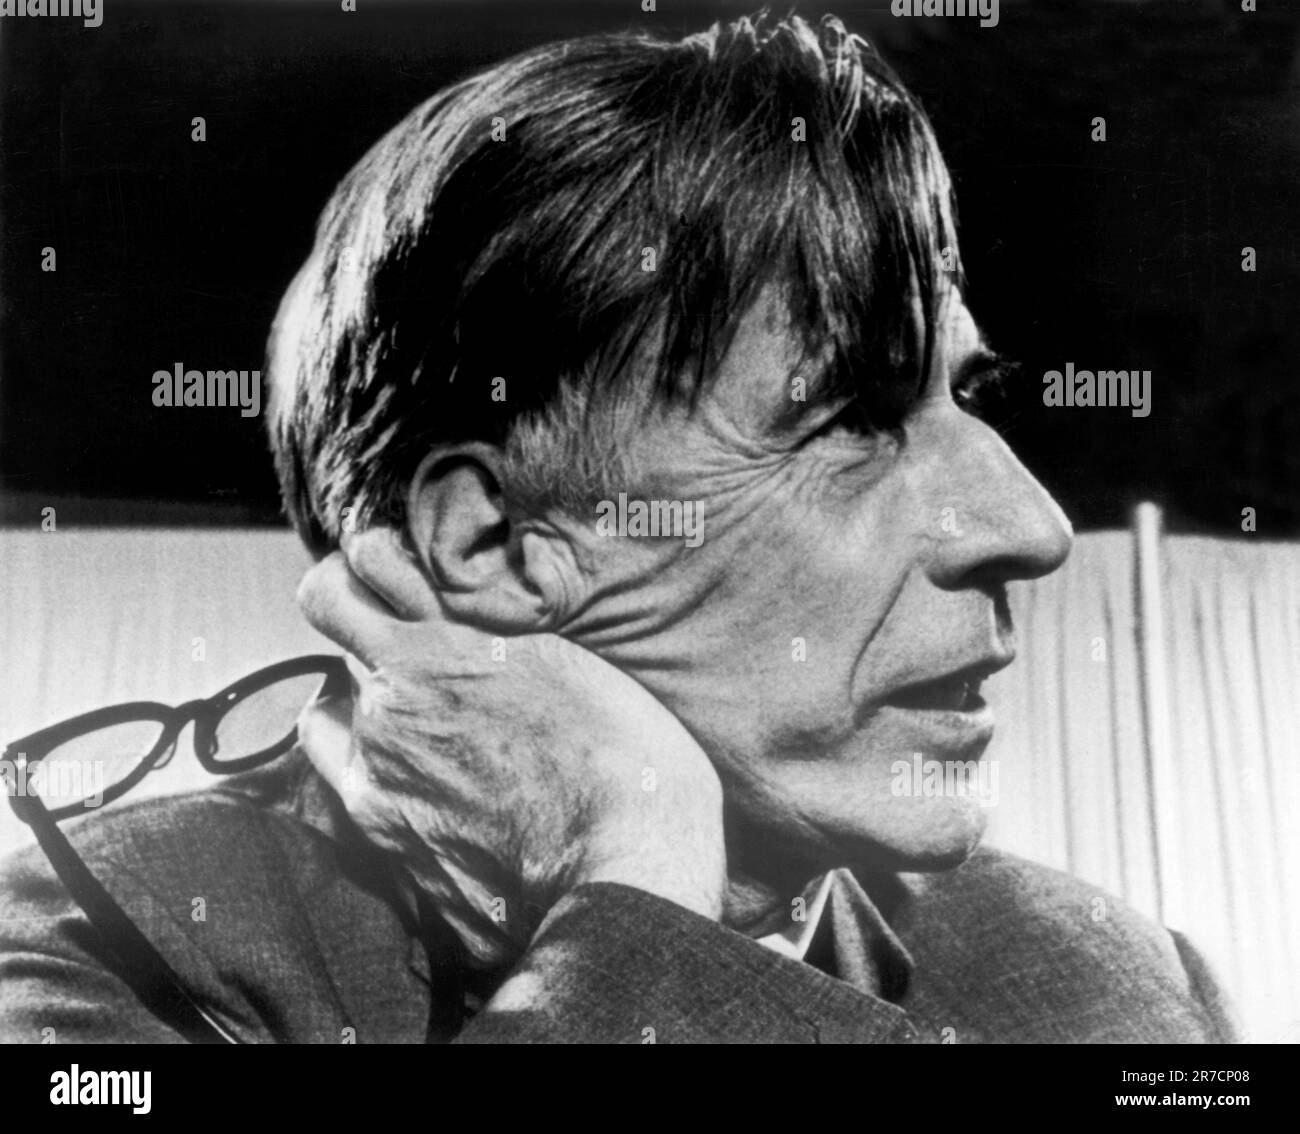 Chicago, Illinois:  August 21, 1968 Economist John Kenneth Galbraith, an advisor to Senator Eugene McCarthy, answers a question during a press conference. Stock Photo